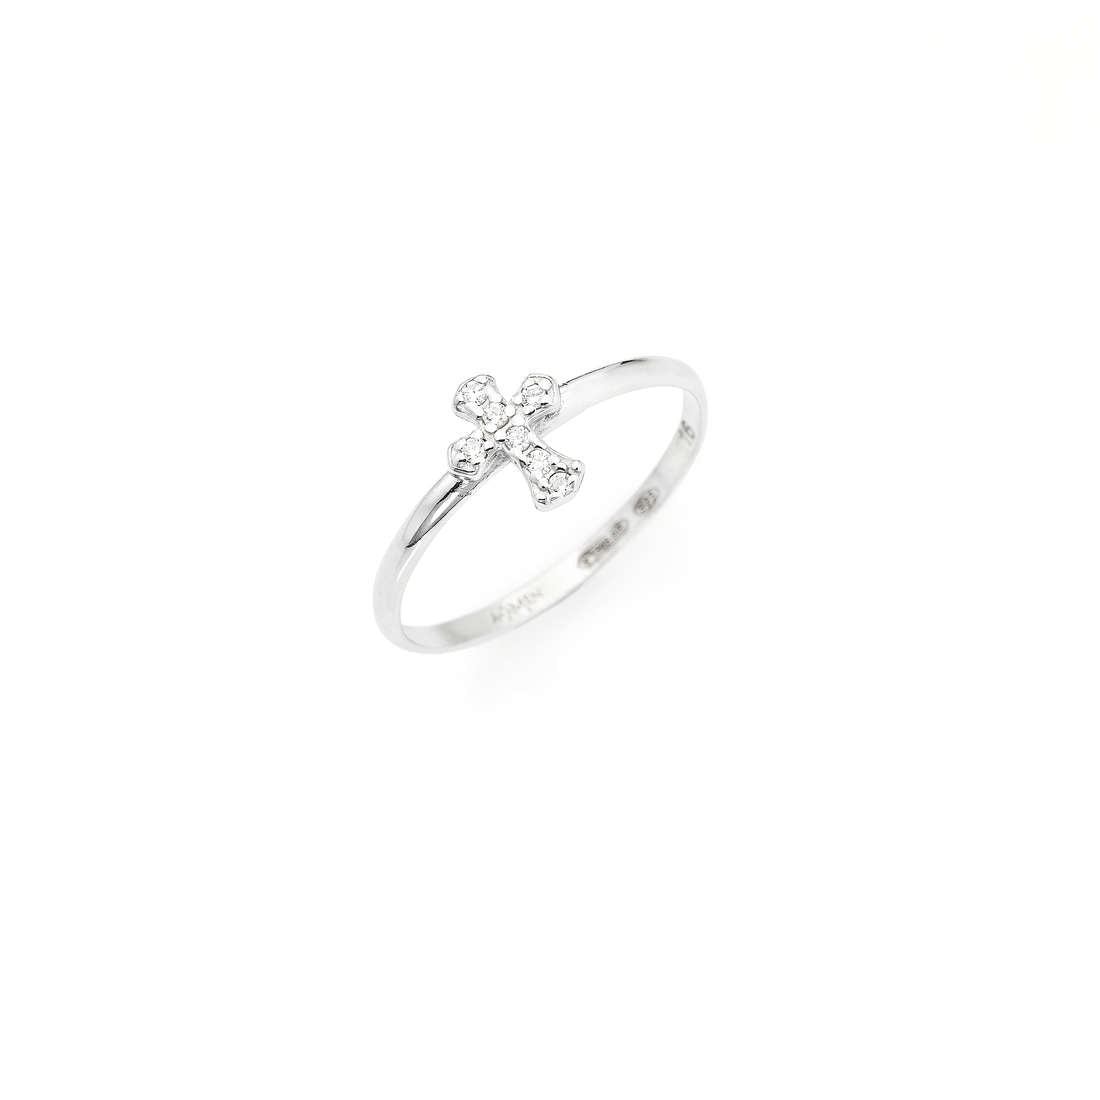 AMEN- Sterling Silver Ring with Cross Pave